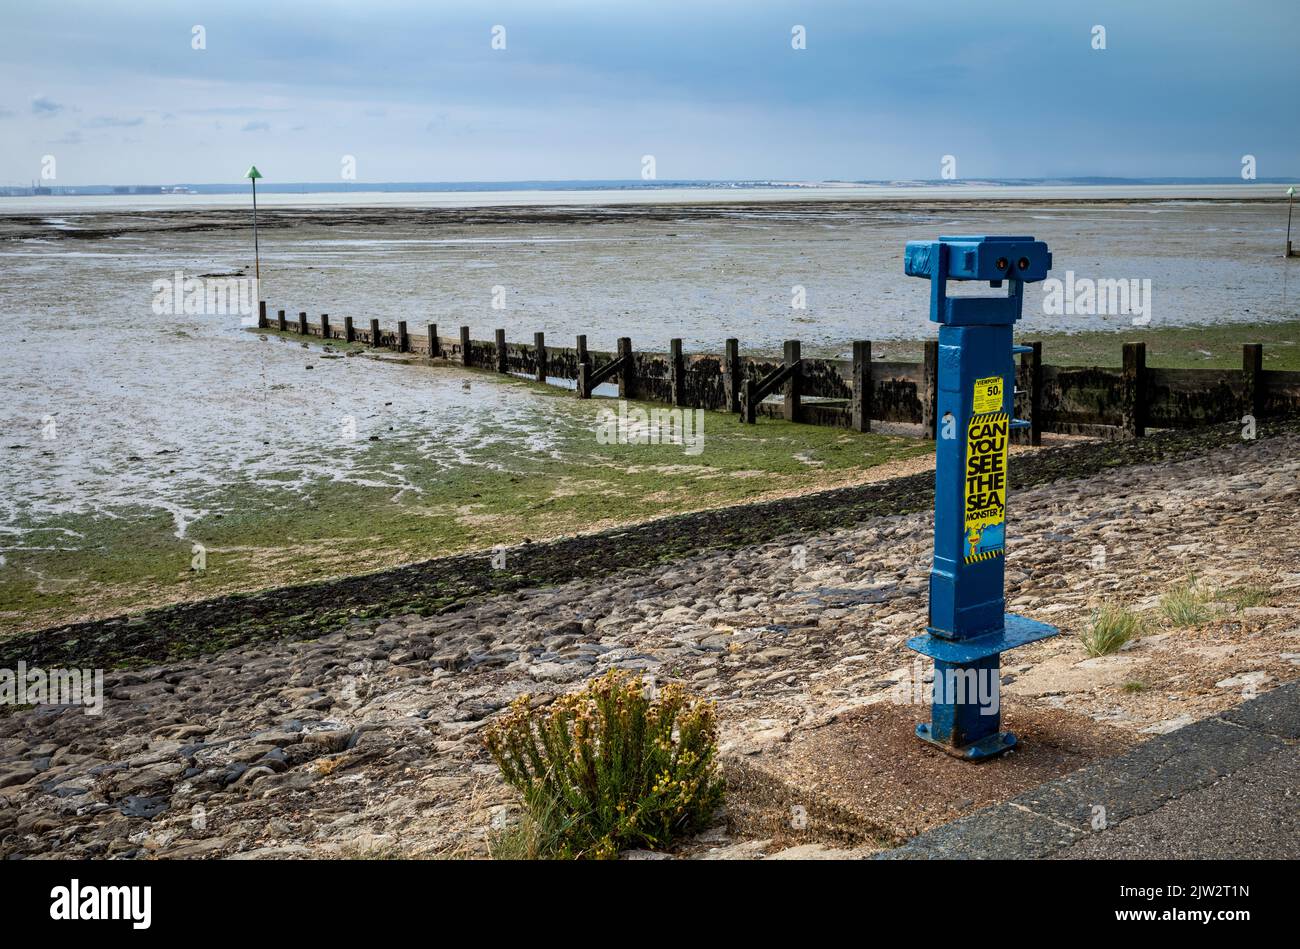 A set of public coin-operated binoculars on the foreshore at Southend-on-Sea, Essex, UK. Stock Photo